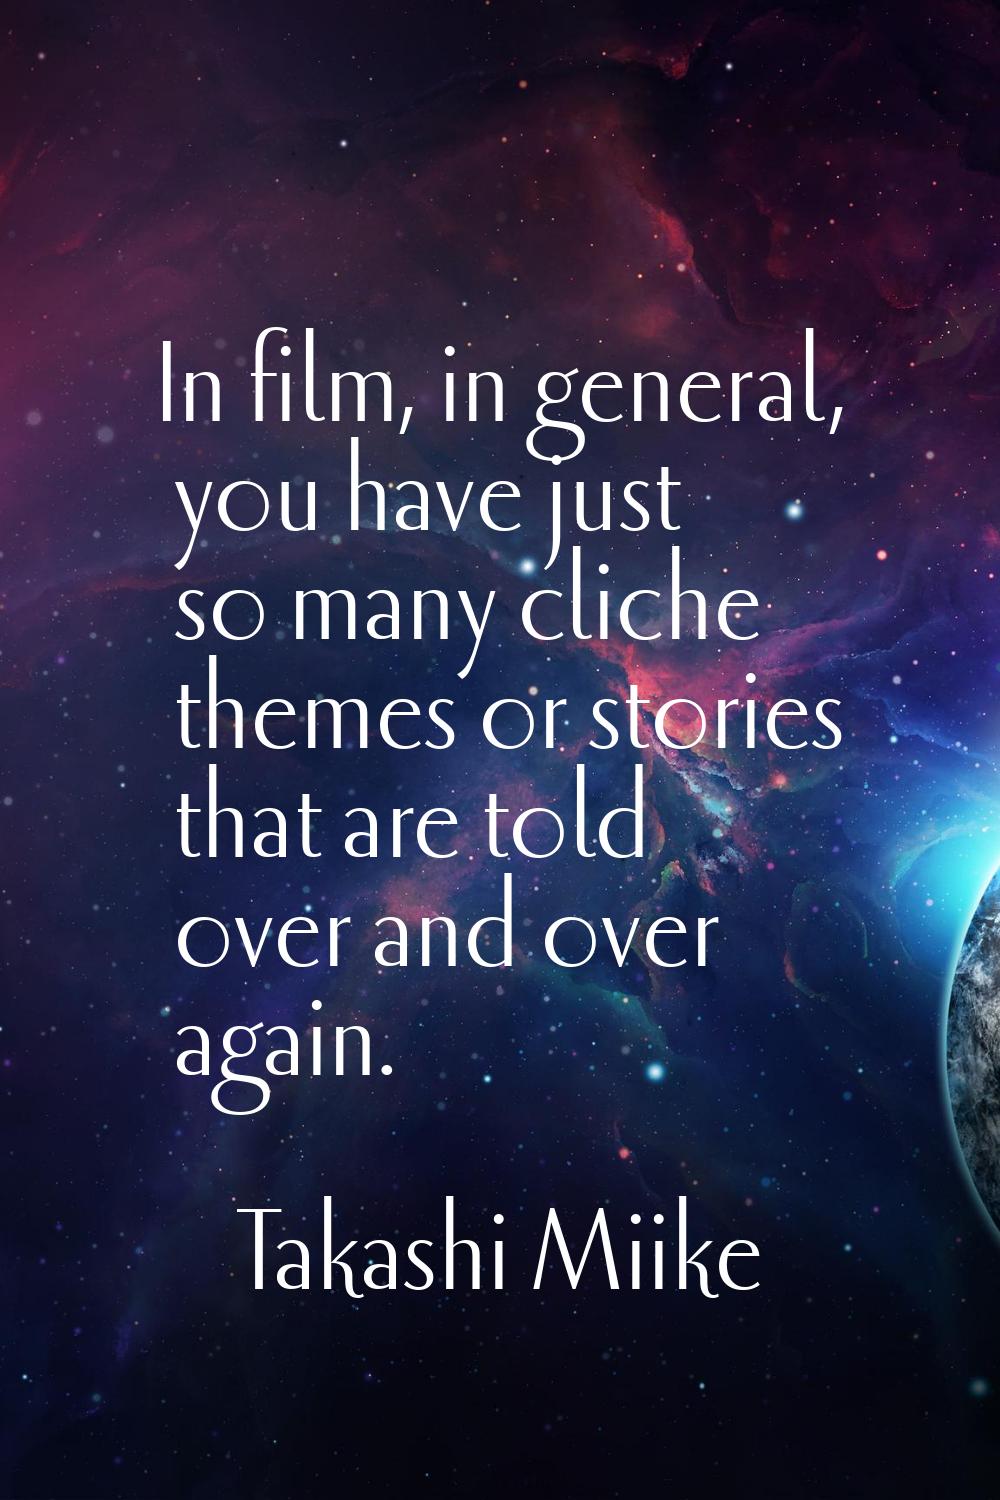 In film, in general, you have just so many cliche themes or stories that are told over and over aga